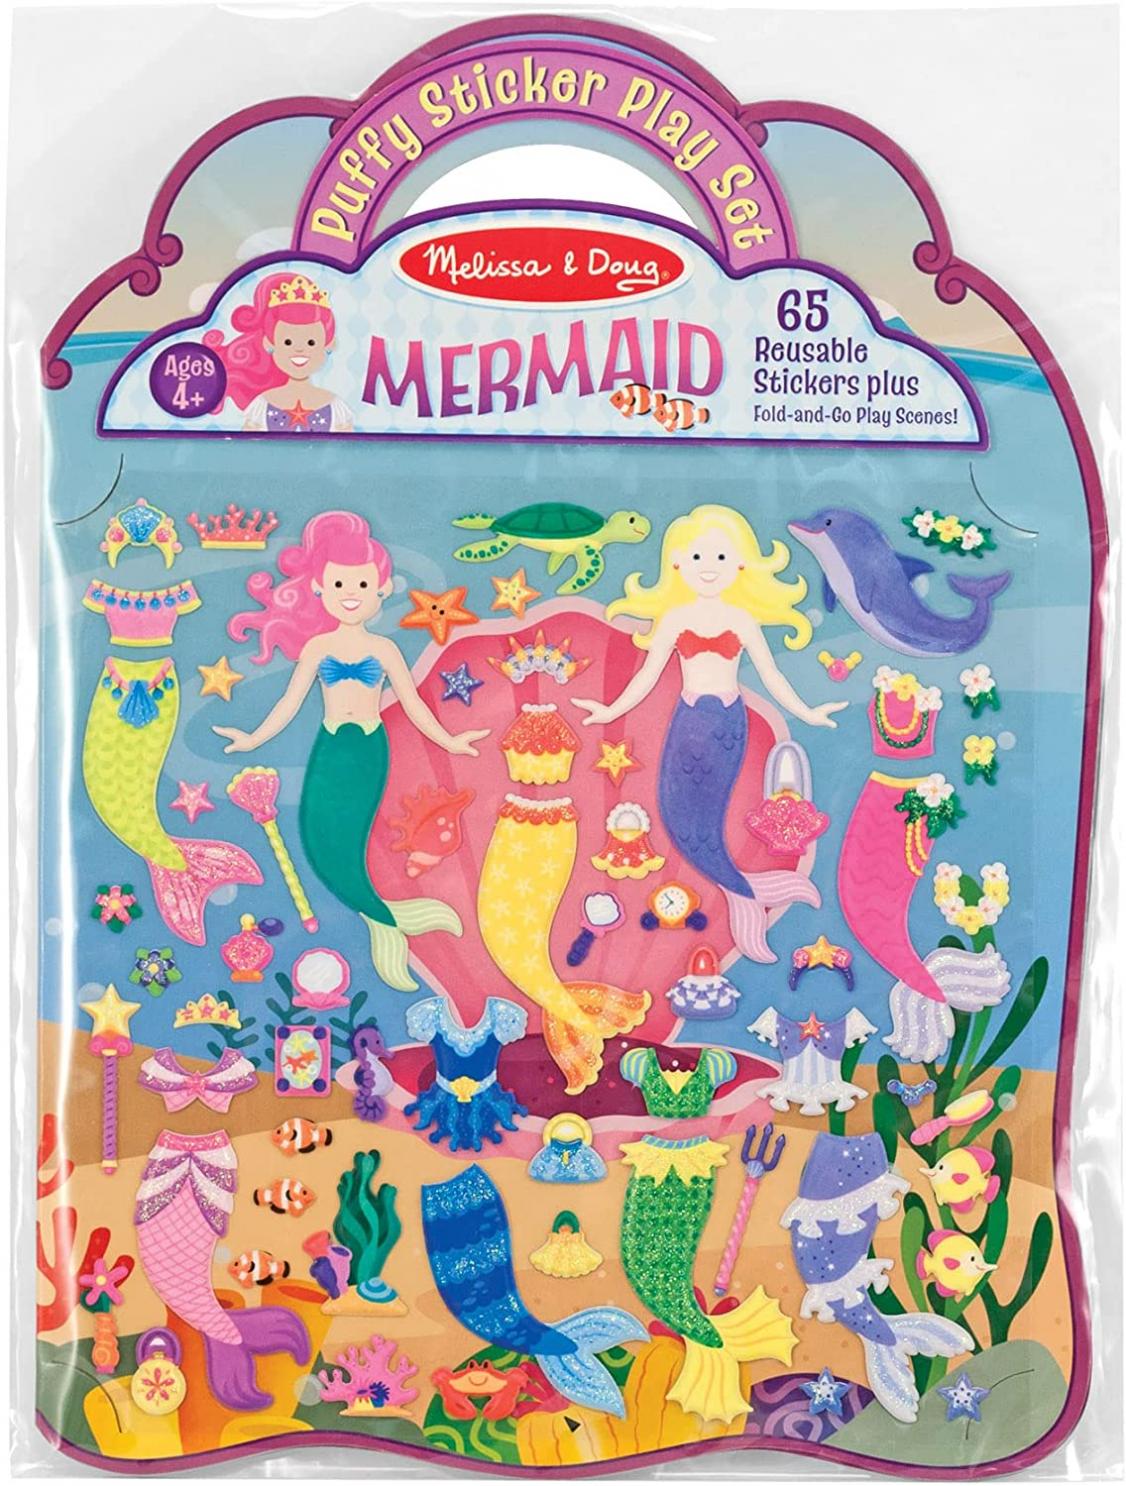 Melissa & Doug Puffy Sticker Activity Book: Mermaids - 65 Reusable Stickers - Kids Fashion Activities, Restickable Mermaid Sticker Book, Puffy Mermaid Removable Stickers For Kids Ages 4+